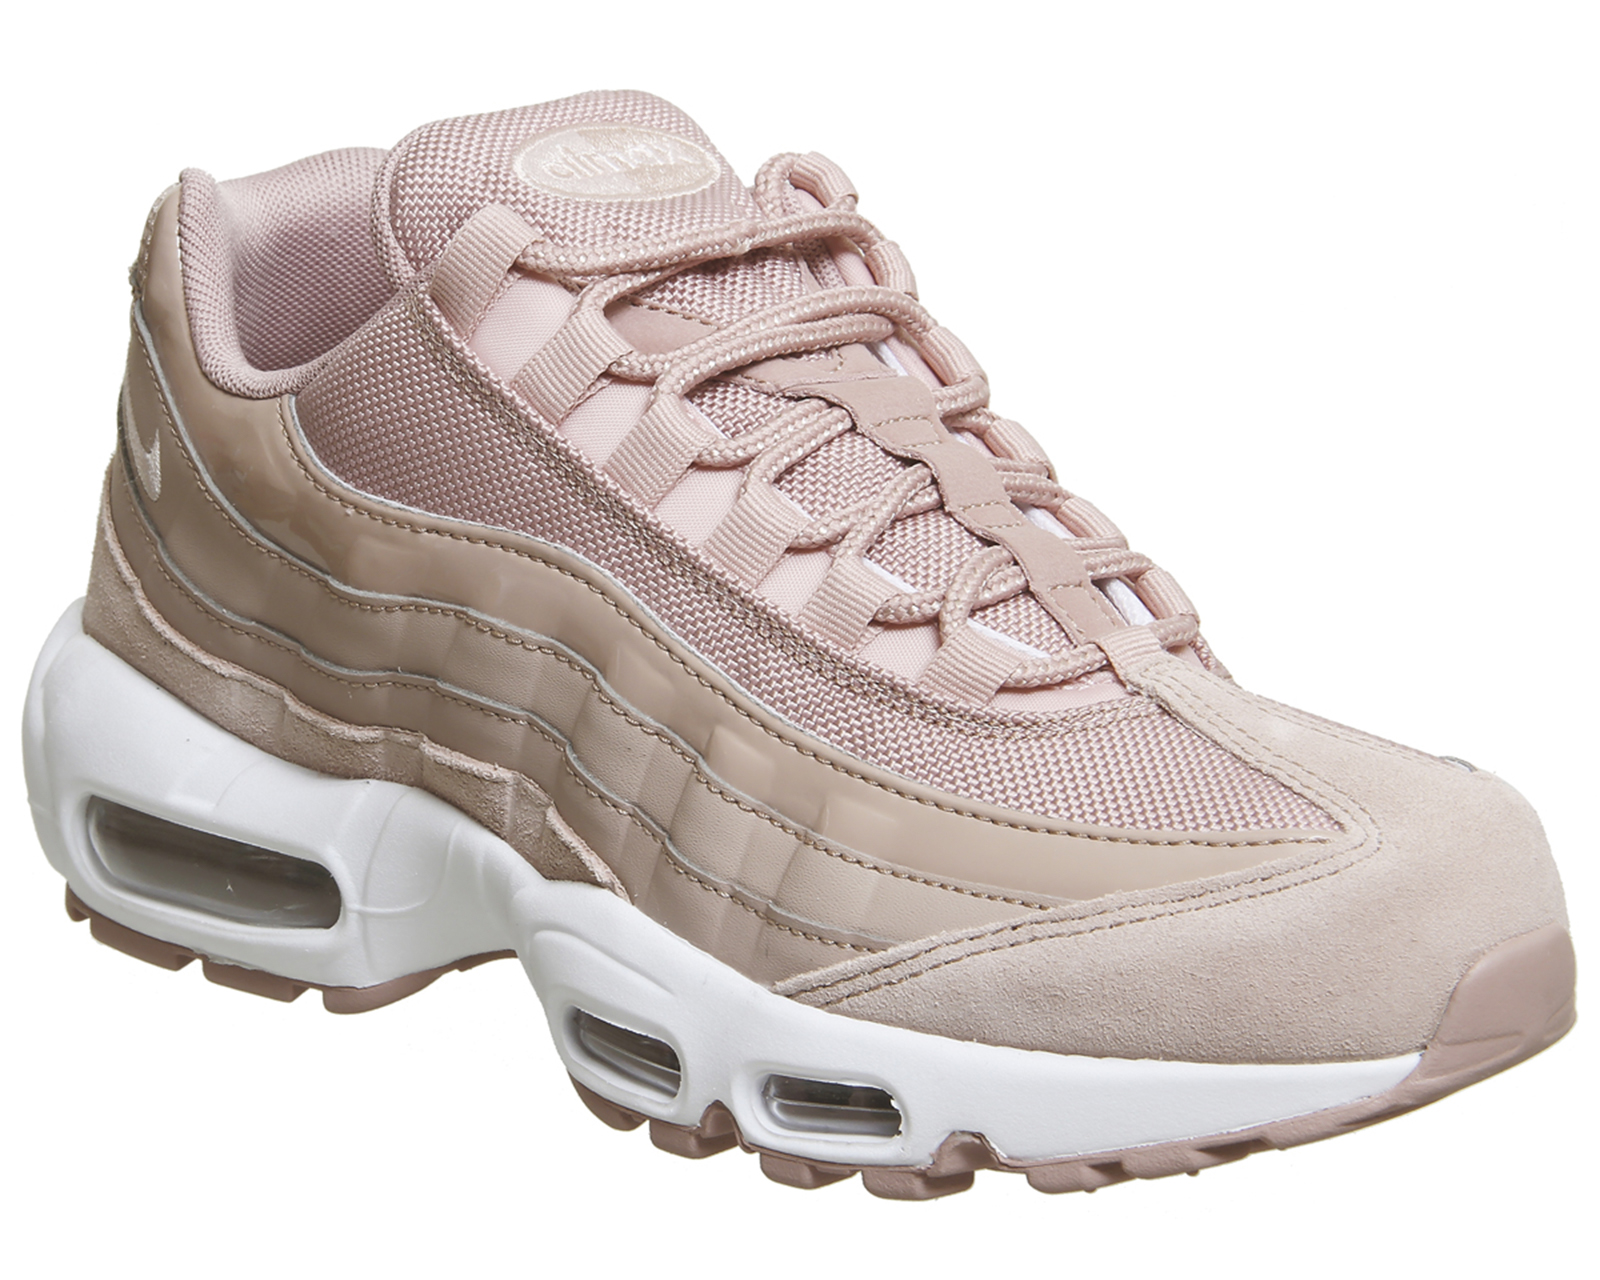 Nike Air Max 95 Particle Pink White 